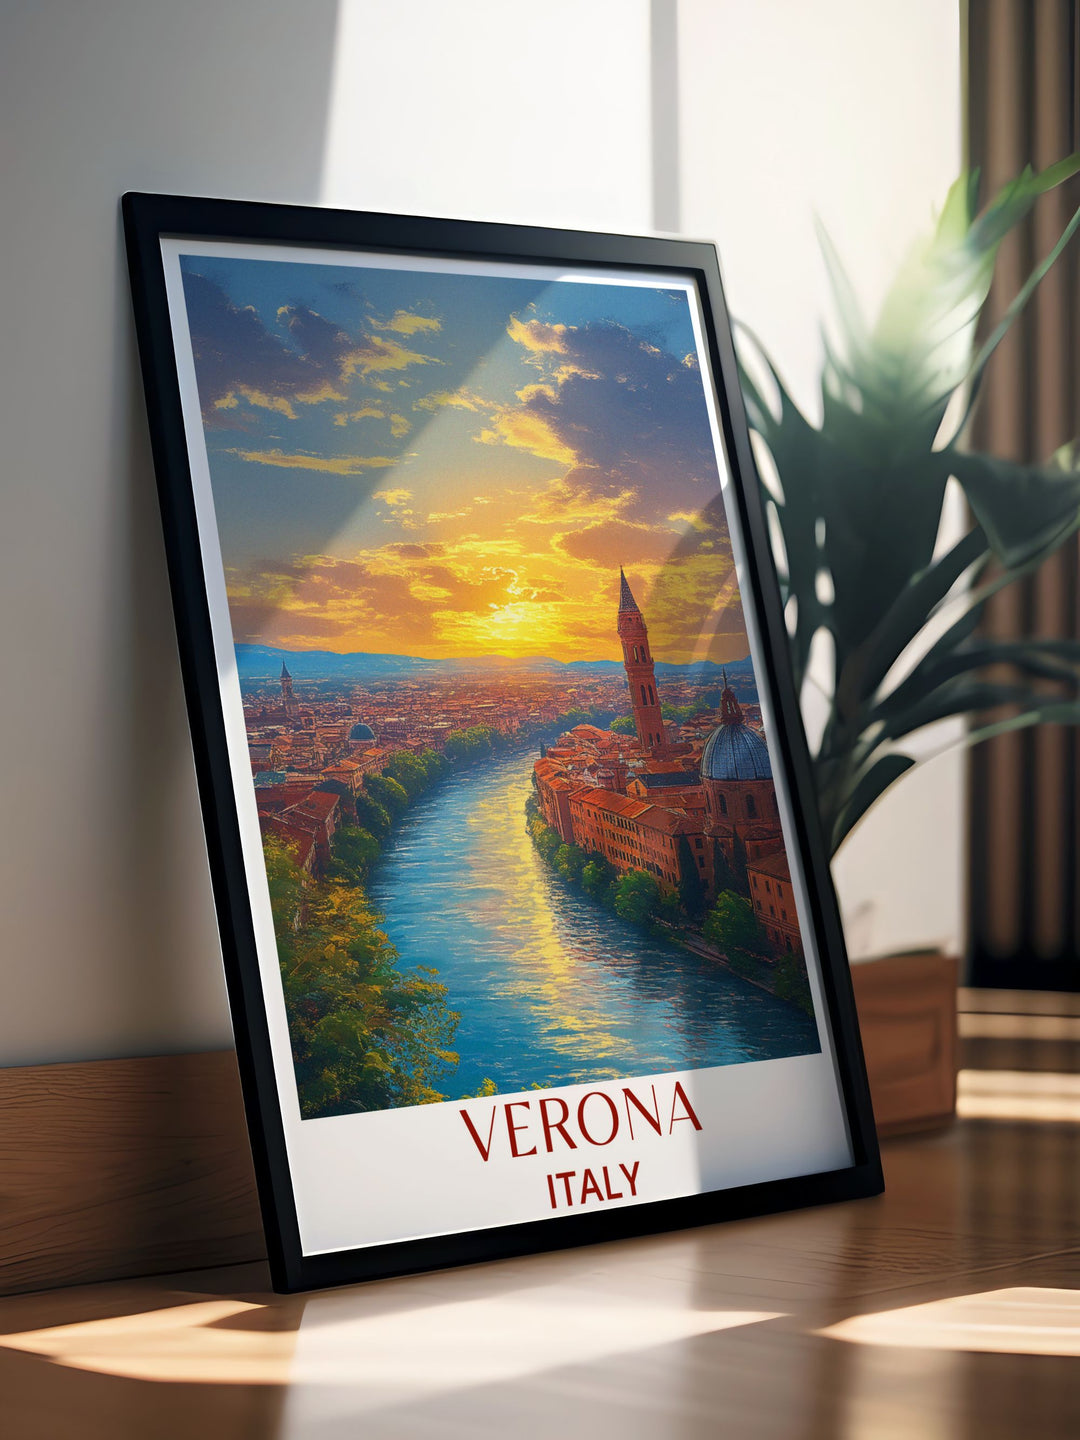 Experience the elegance and cultural richness of Verona with this travel poster. The artwork captures the panoramic views from Castel San Pietro and the historic charm of Verona, making it a perfect piece for those who appreciate Italian art and history.